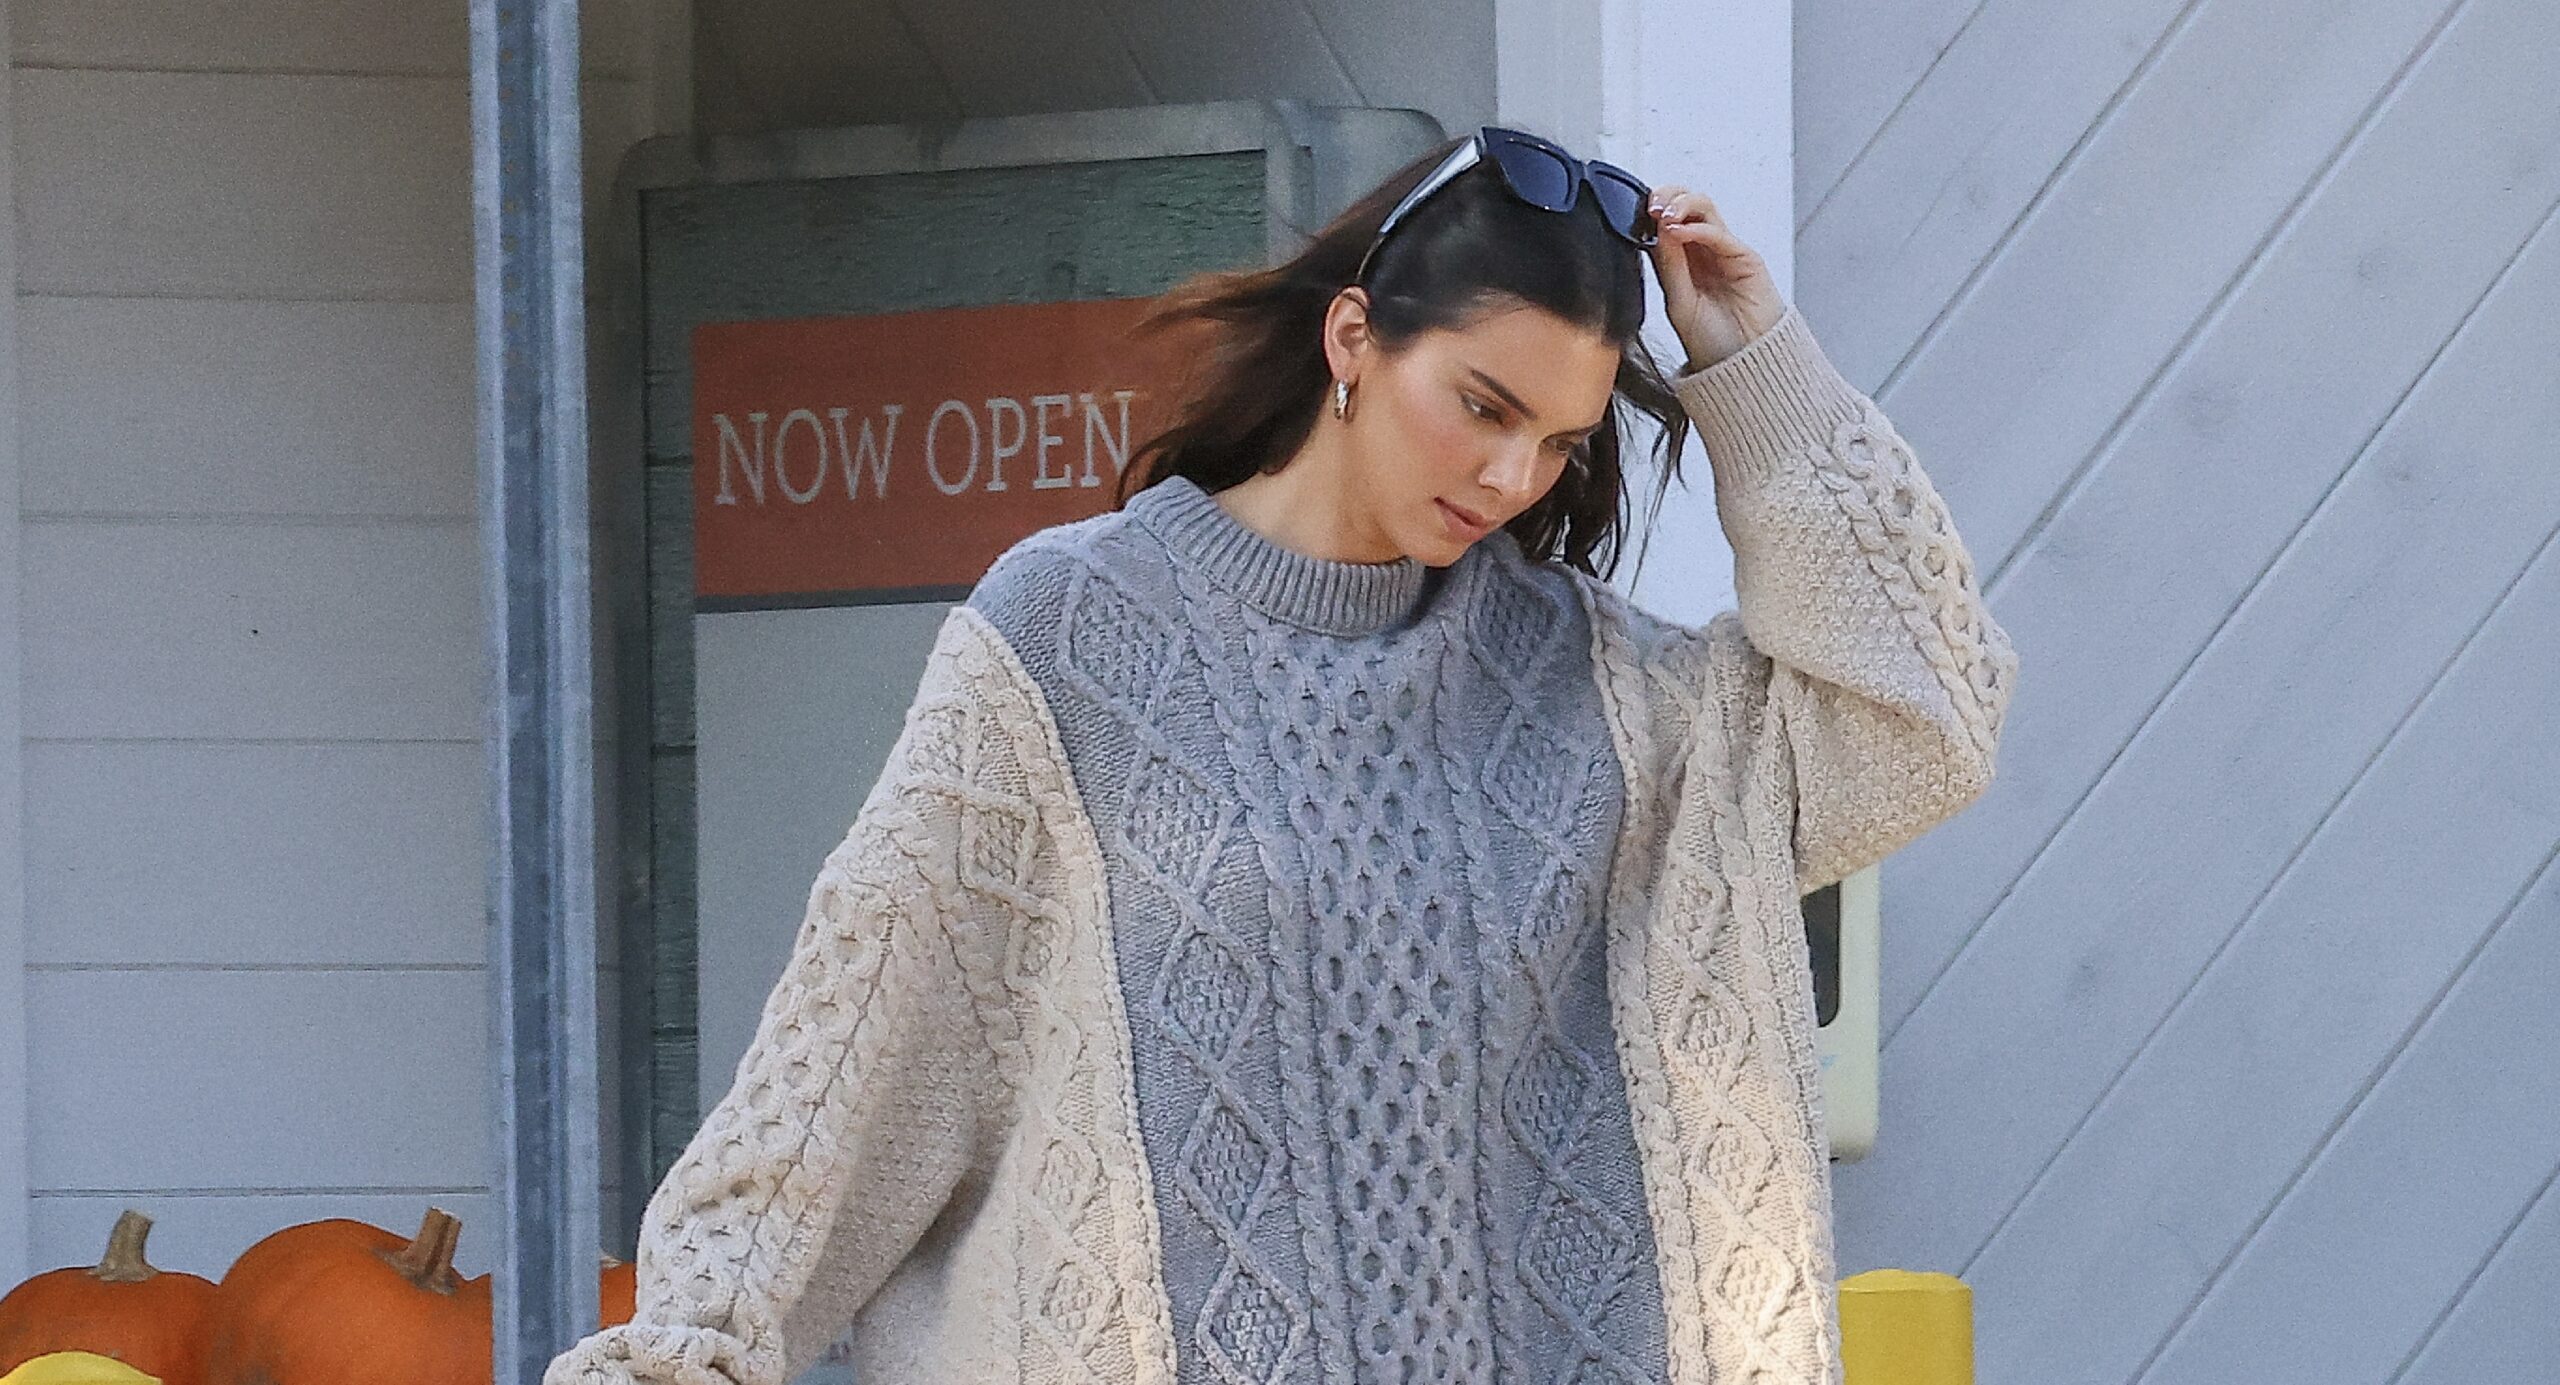 Kendall Jenner stepping out in a chunky knit sweater by Bottega Veneta, carrying a large tote and a bouquet of sunflowers, showcasing a relaxed yet luxurious style.